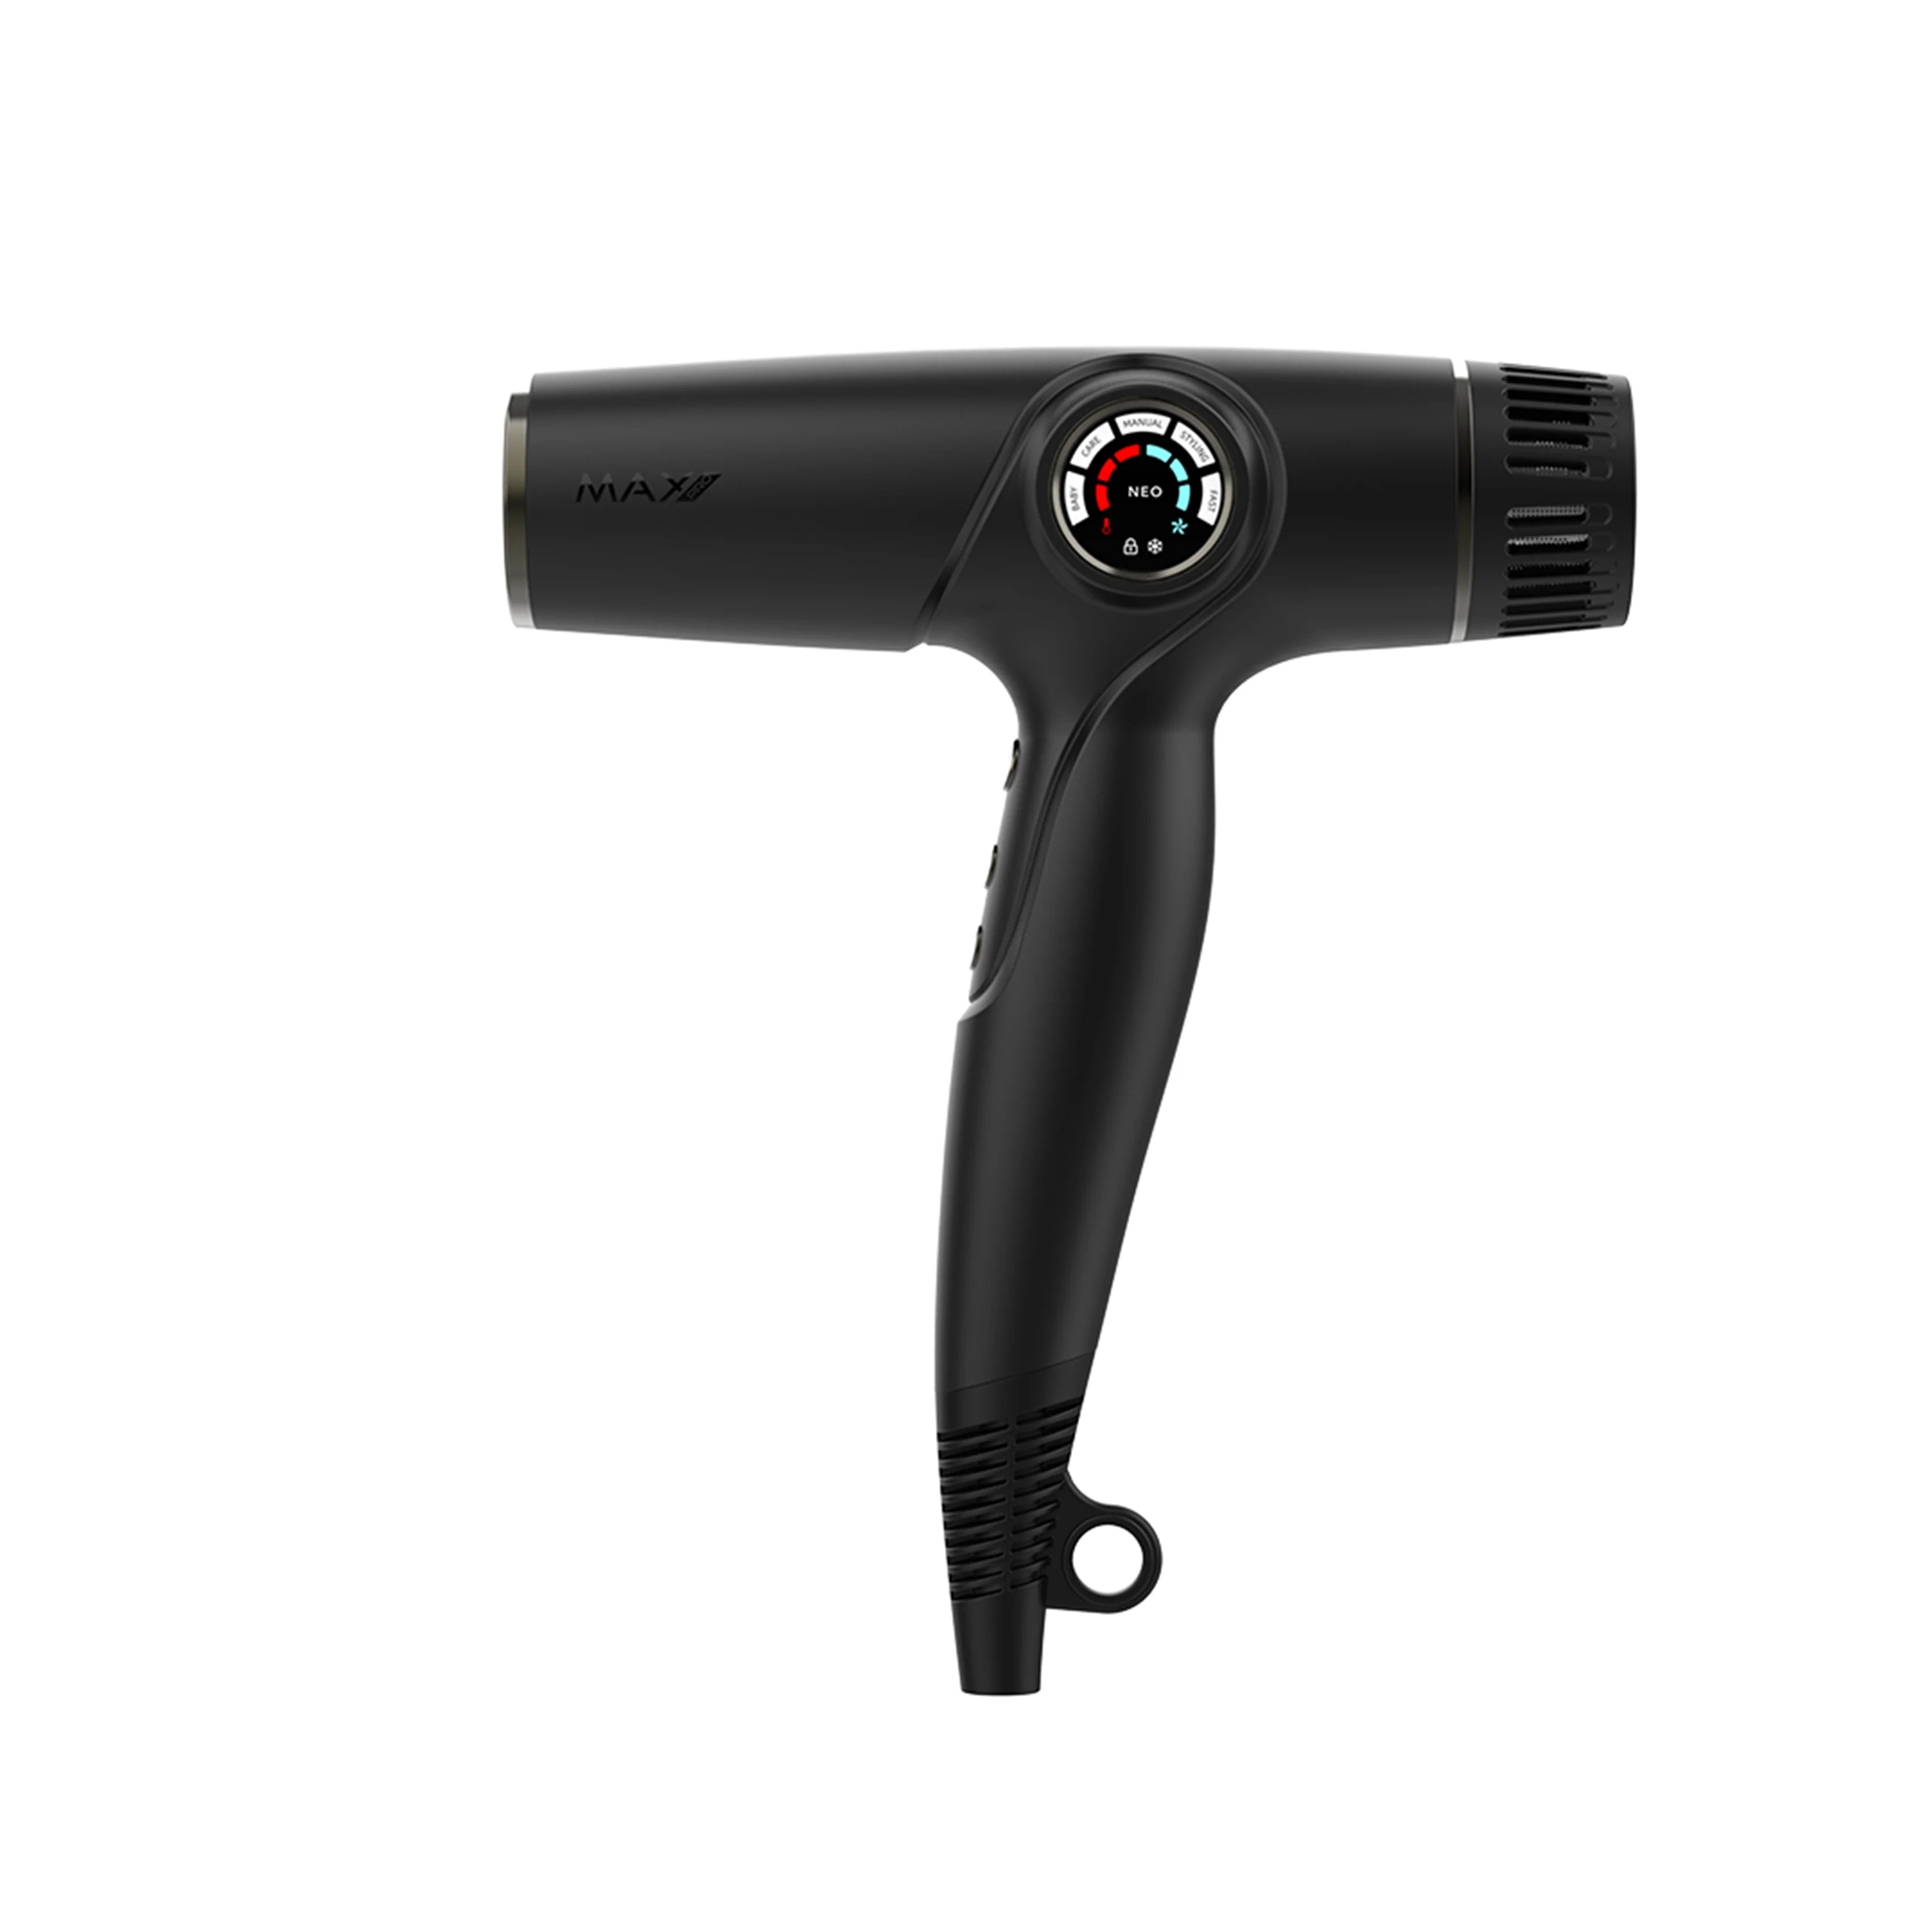 Max Pro NEO Hair Dryer 2100W - Max Pro x MOHI